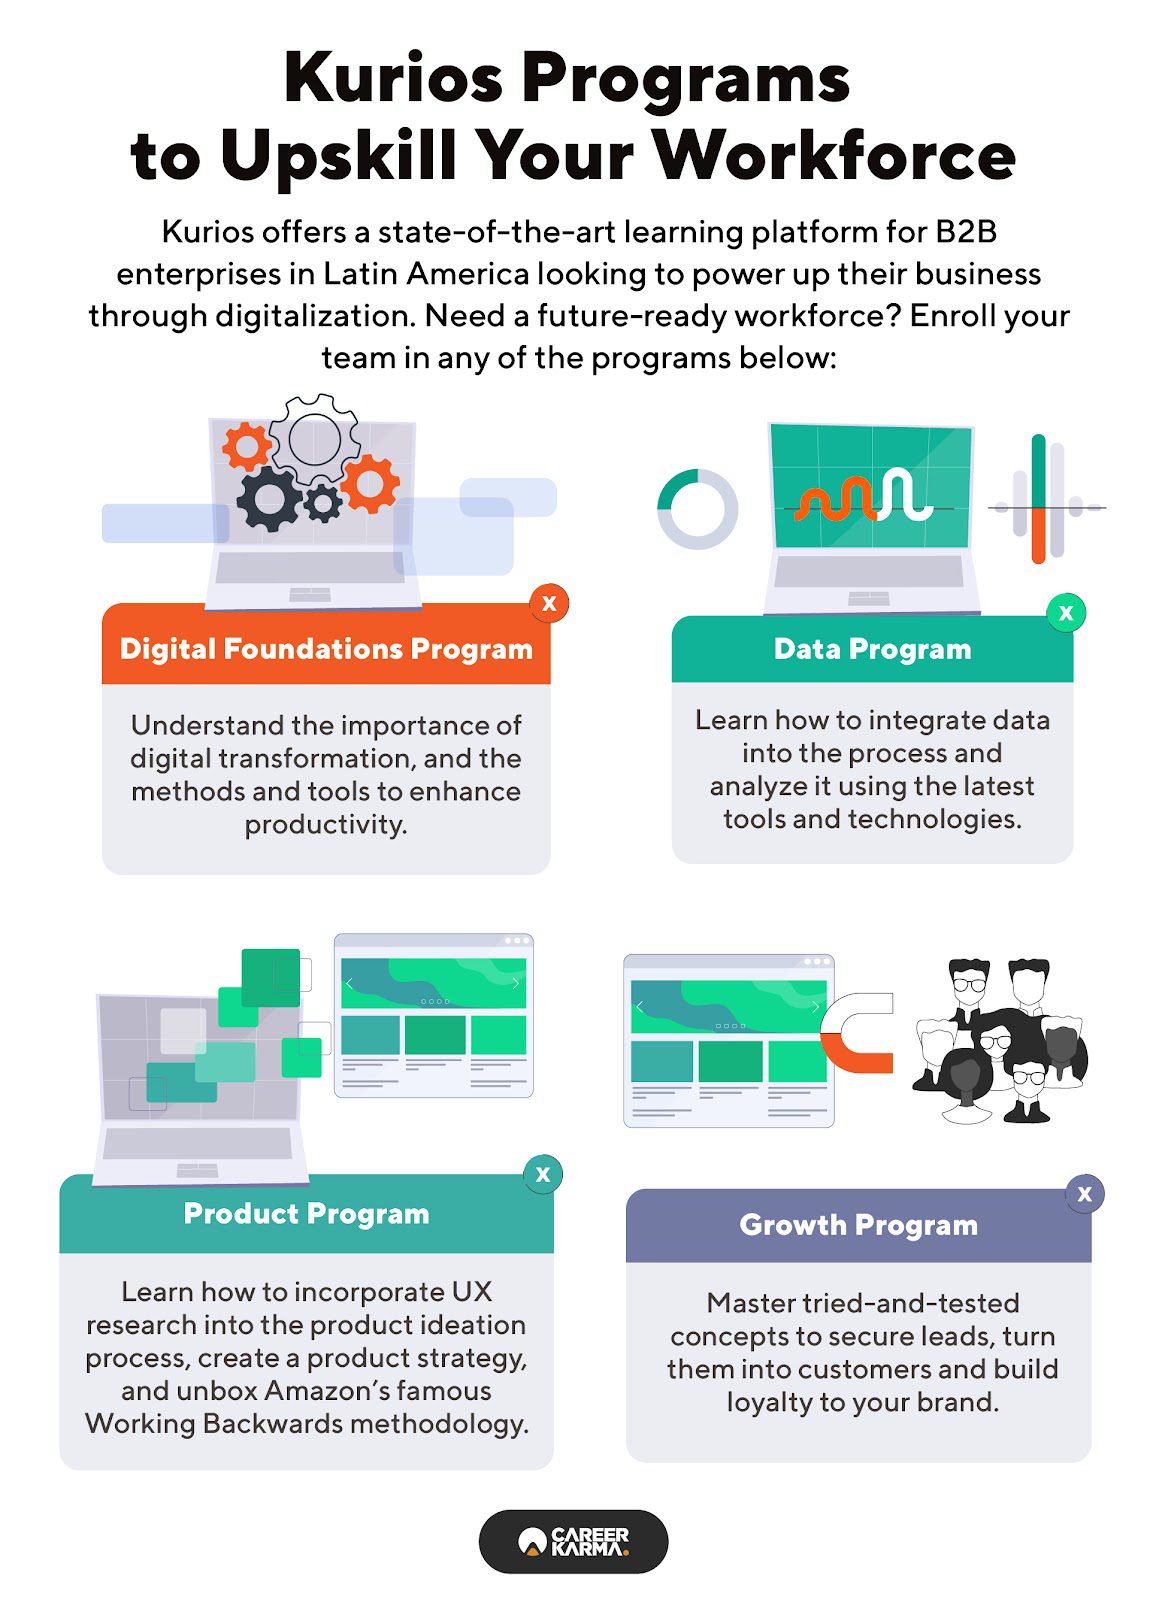 An infographic featuring Kurios’ upskilling digital programs for Latin American businesses